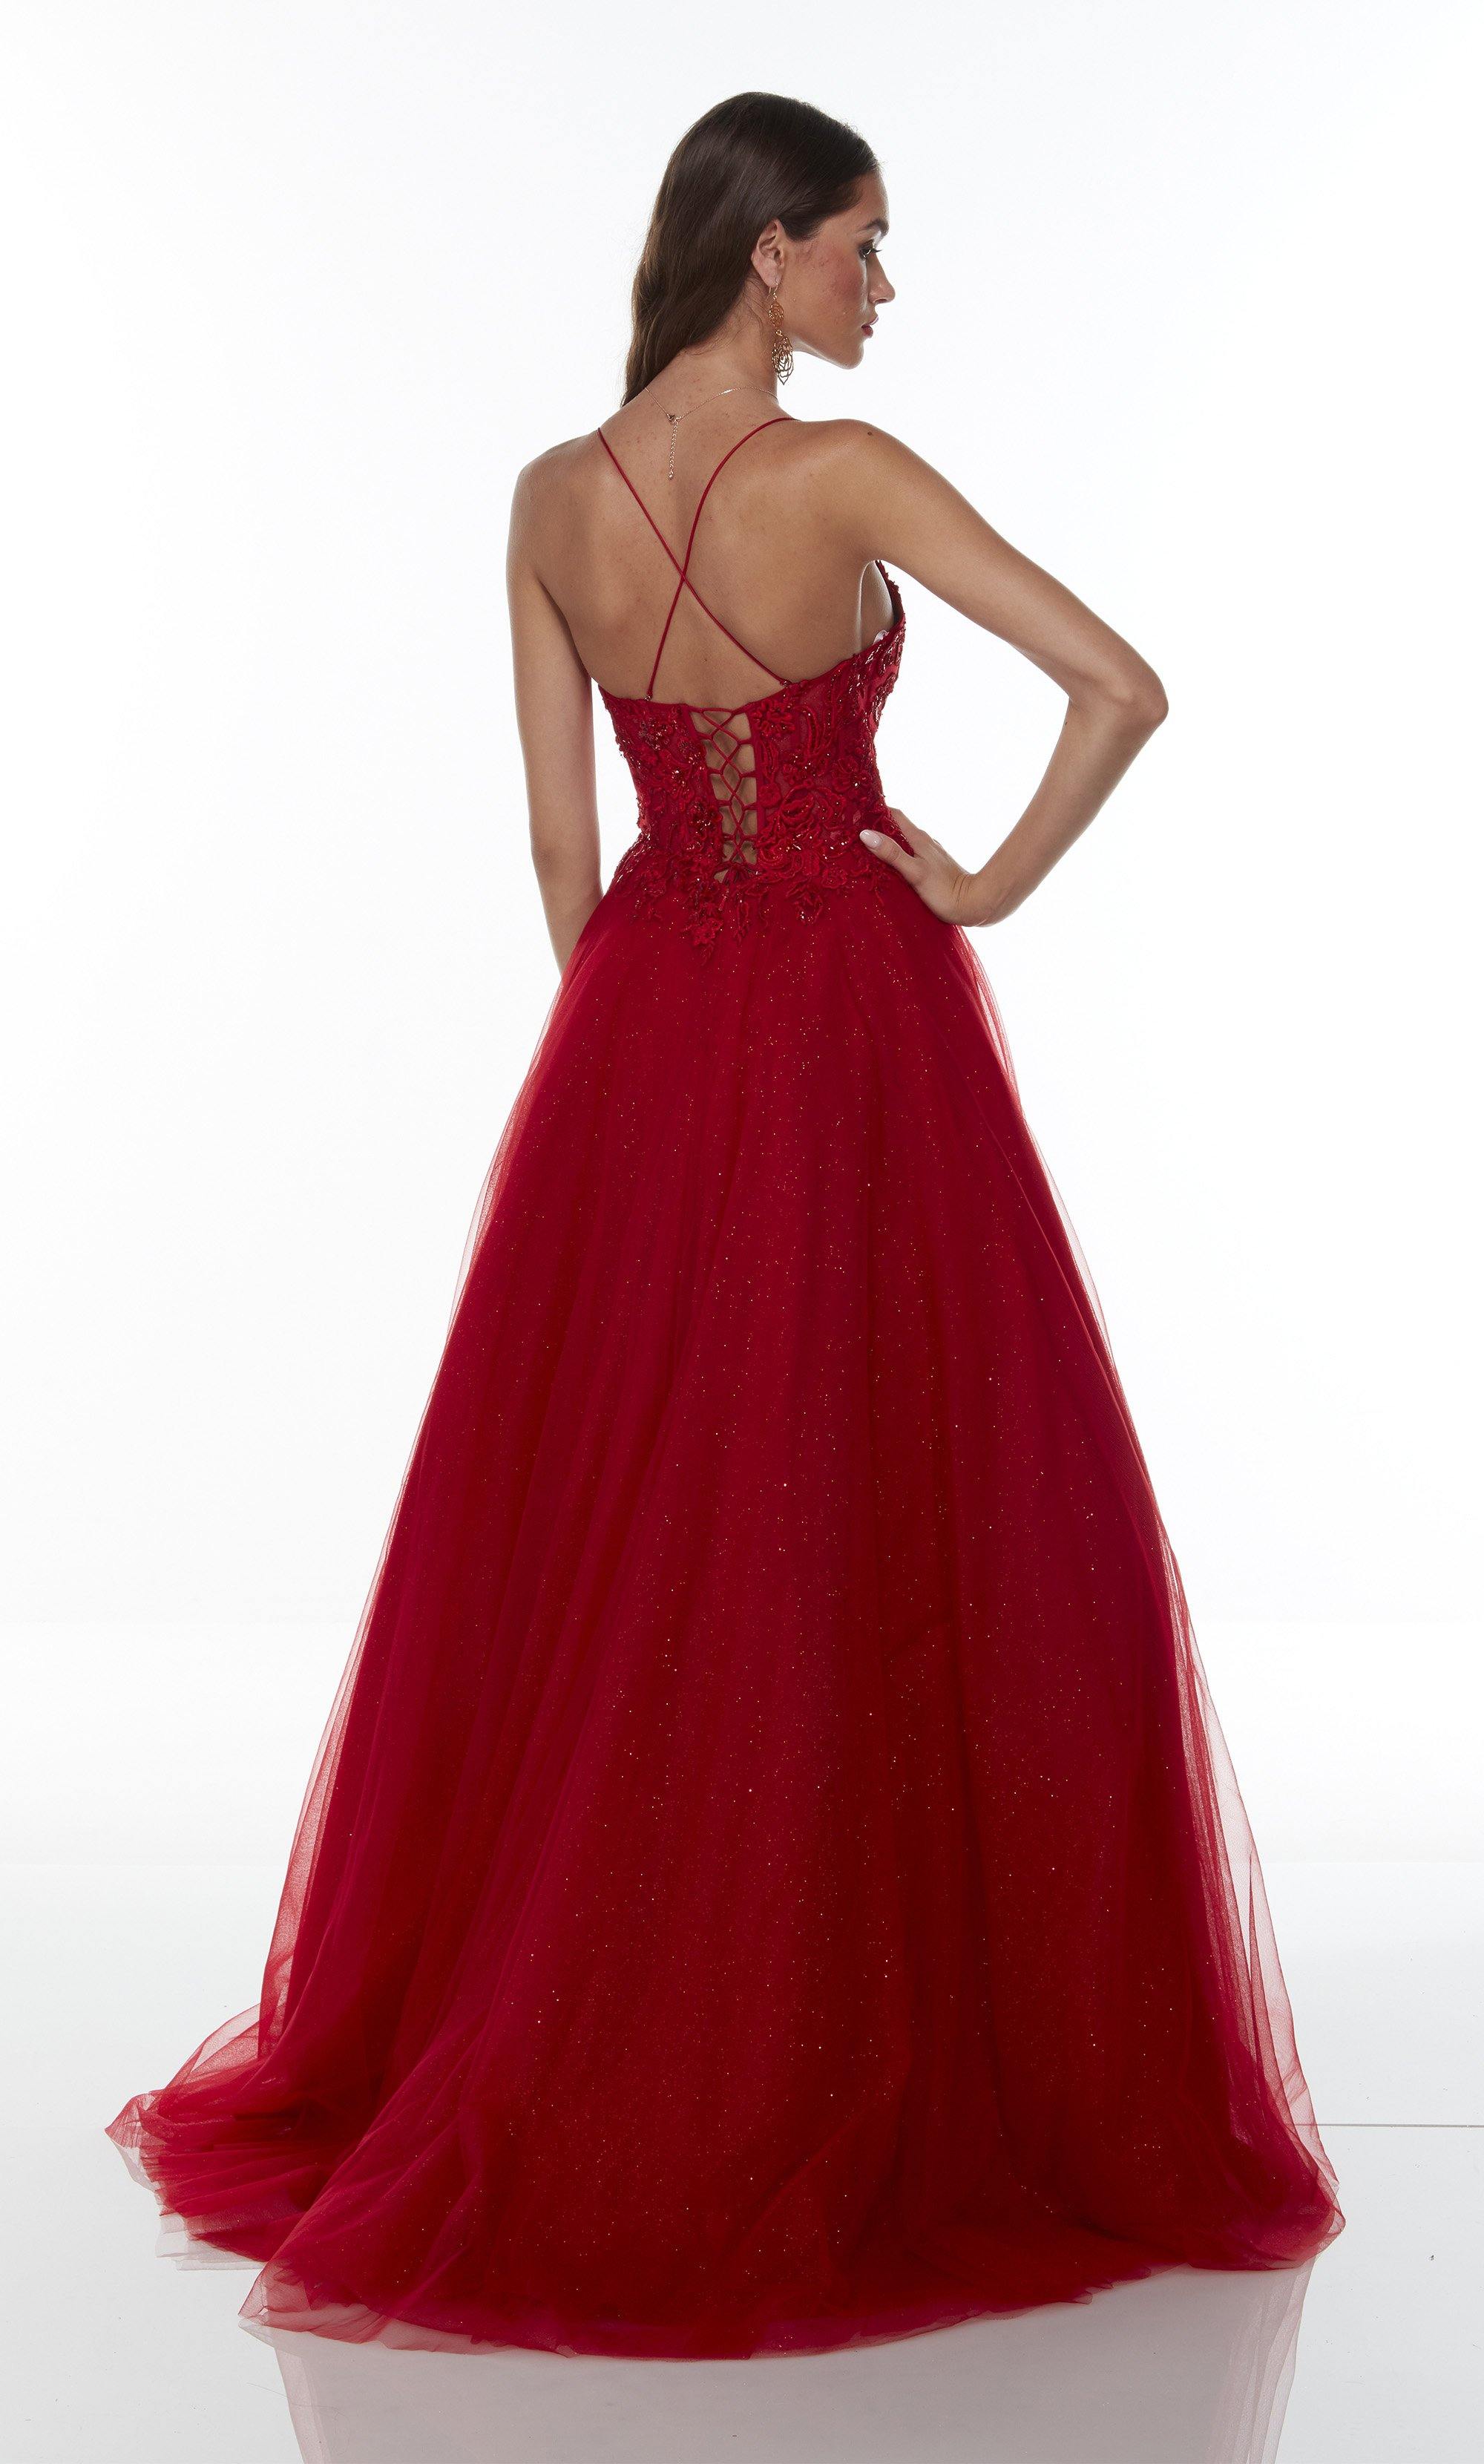 Absolute Red Gown | Princess prom dresses, Prom dresses ball gown, Red  wedding dresses